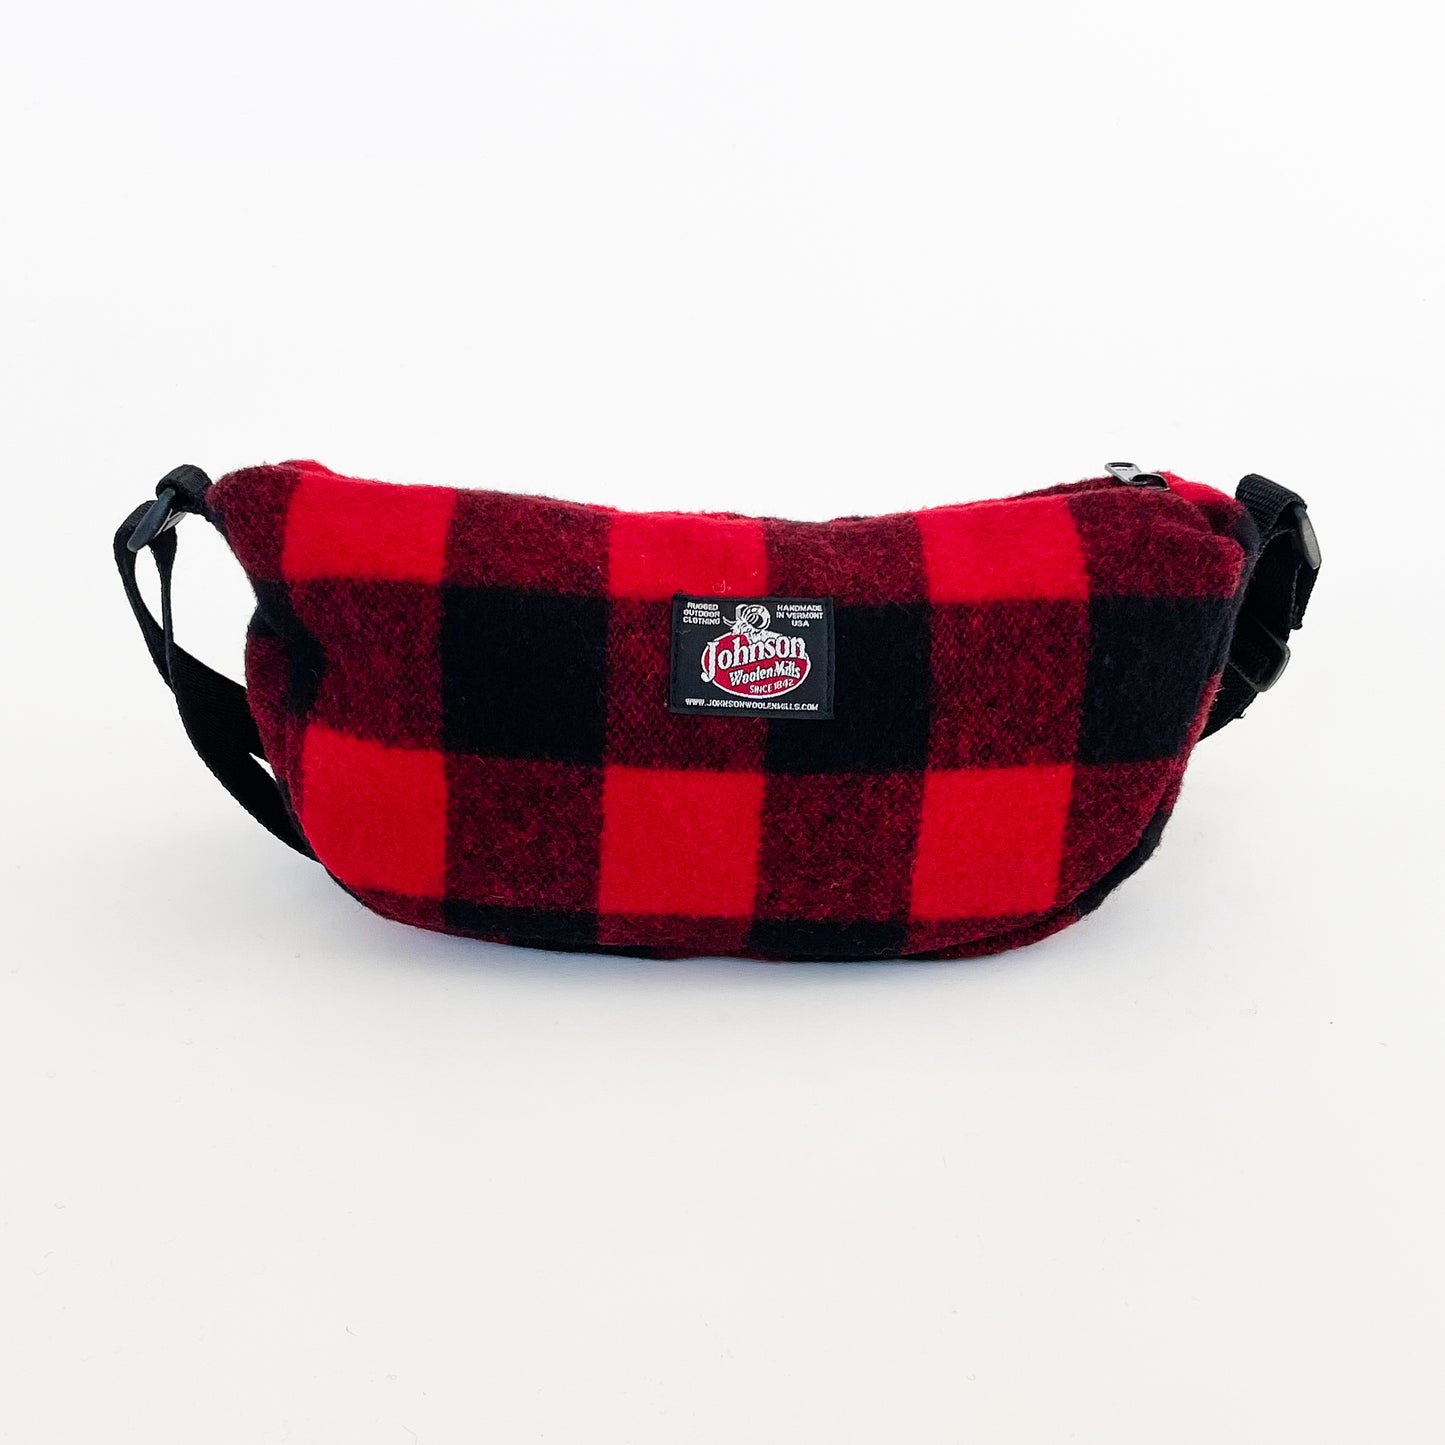 Wool sidewinder bag with strap - bag with zipped closure and belt loops for wearing on your waist plus shoulder strap. Shown in red and black buffalo plaid